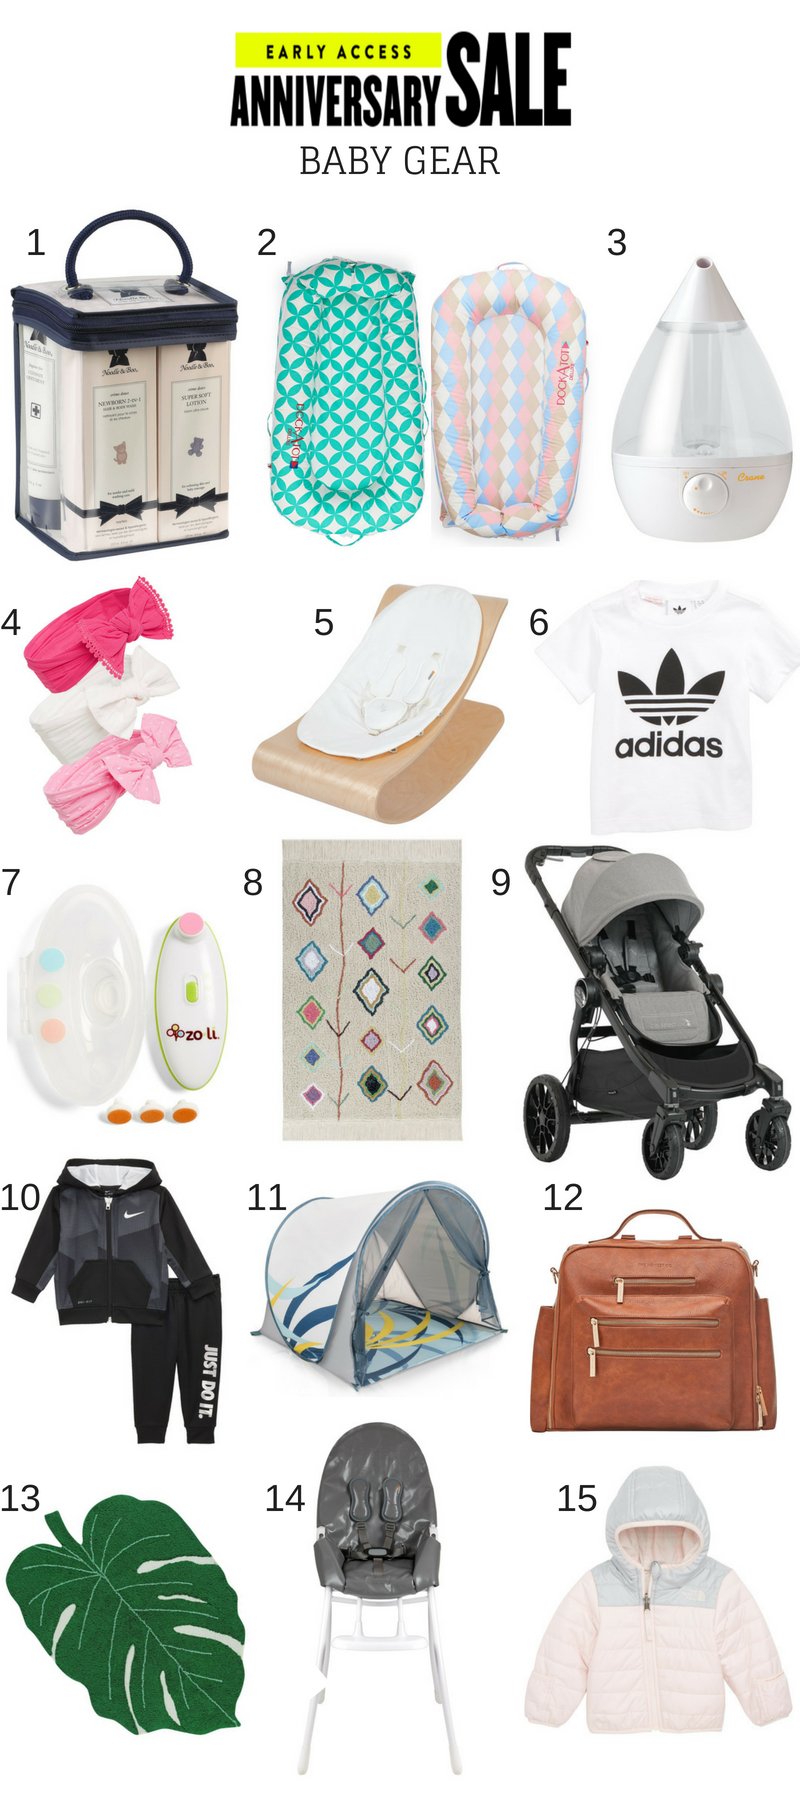 Best Baby Gear Deals from the Nordstrom Anniversary Sale featured by popular Las Vegas fashion blogger, Outfits & Outings